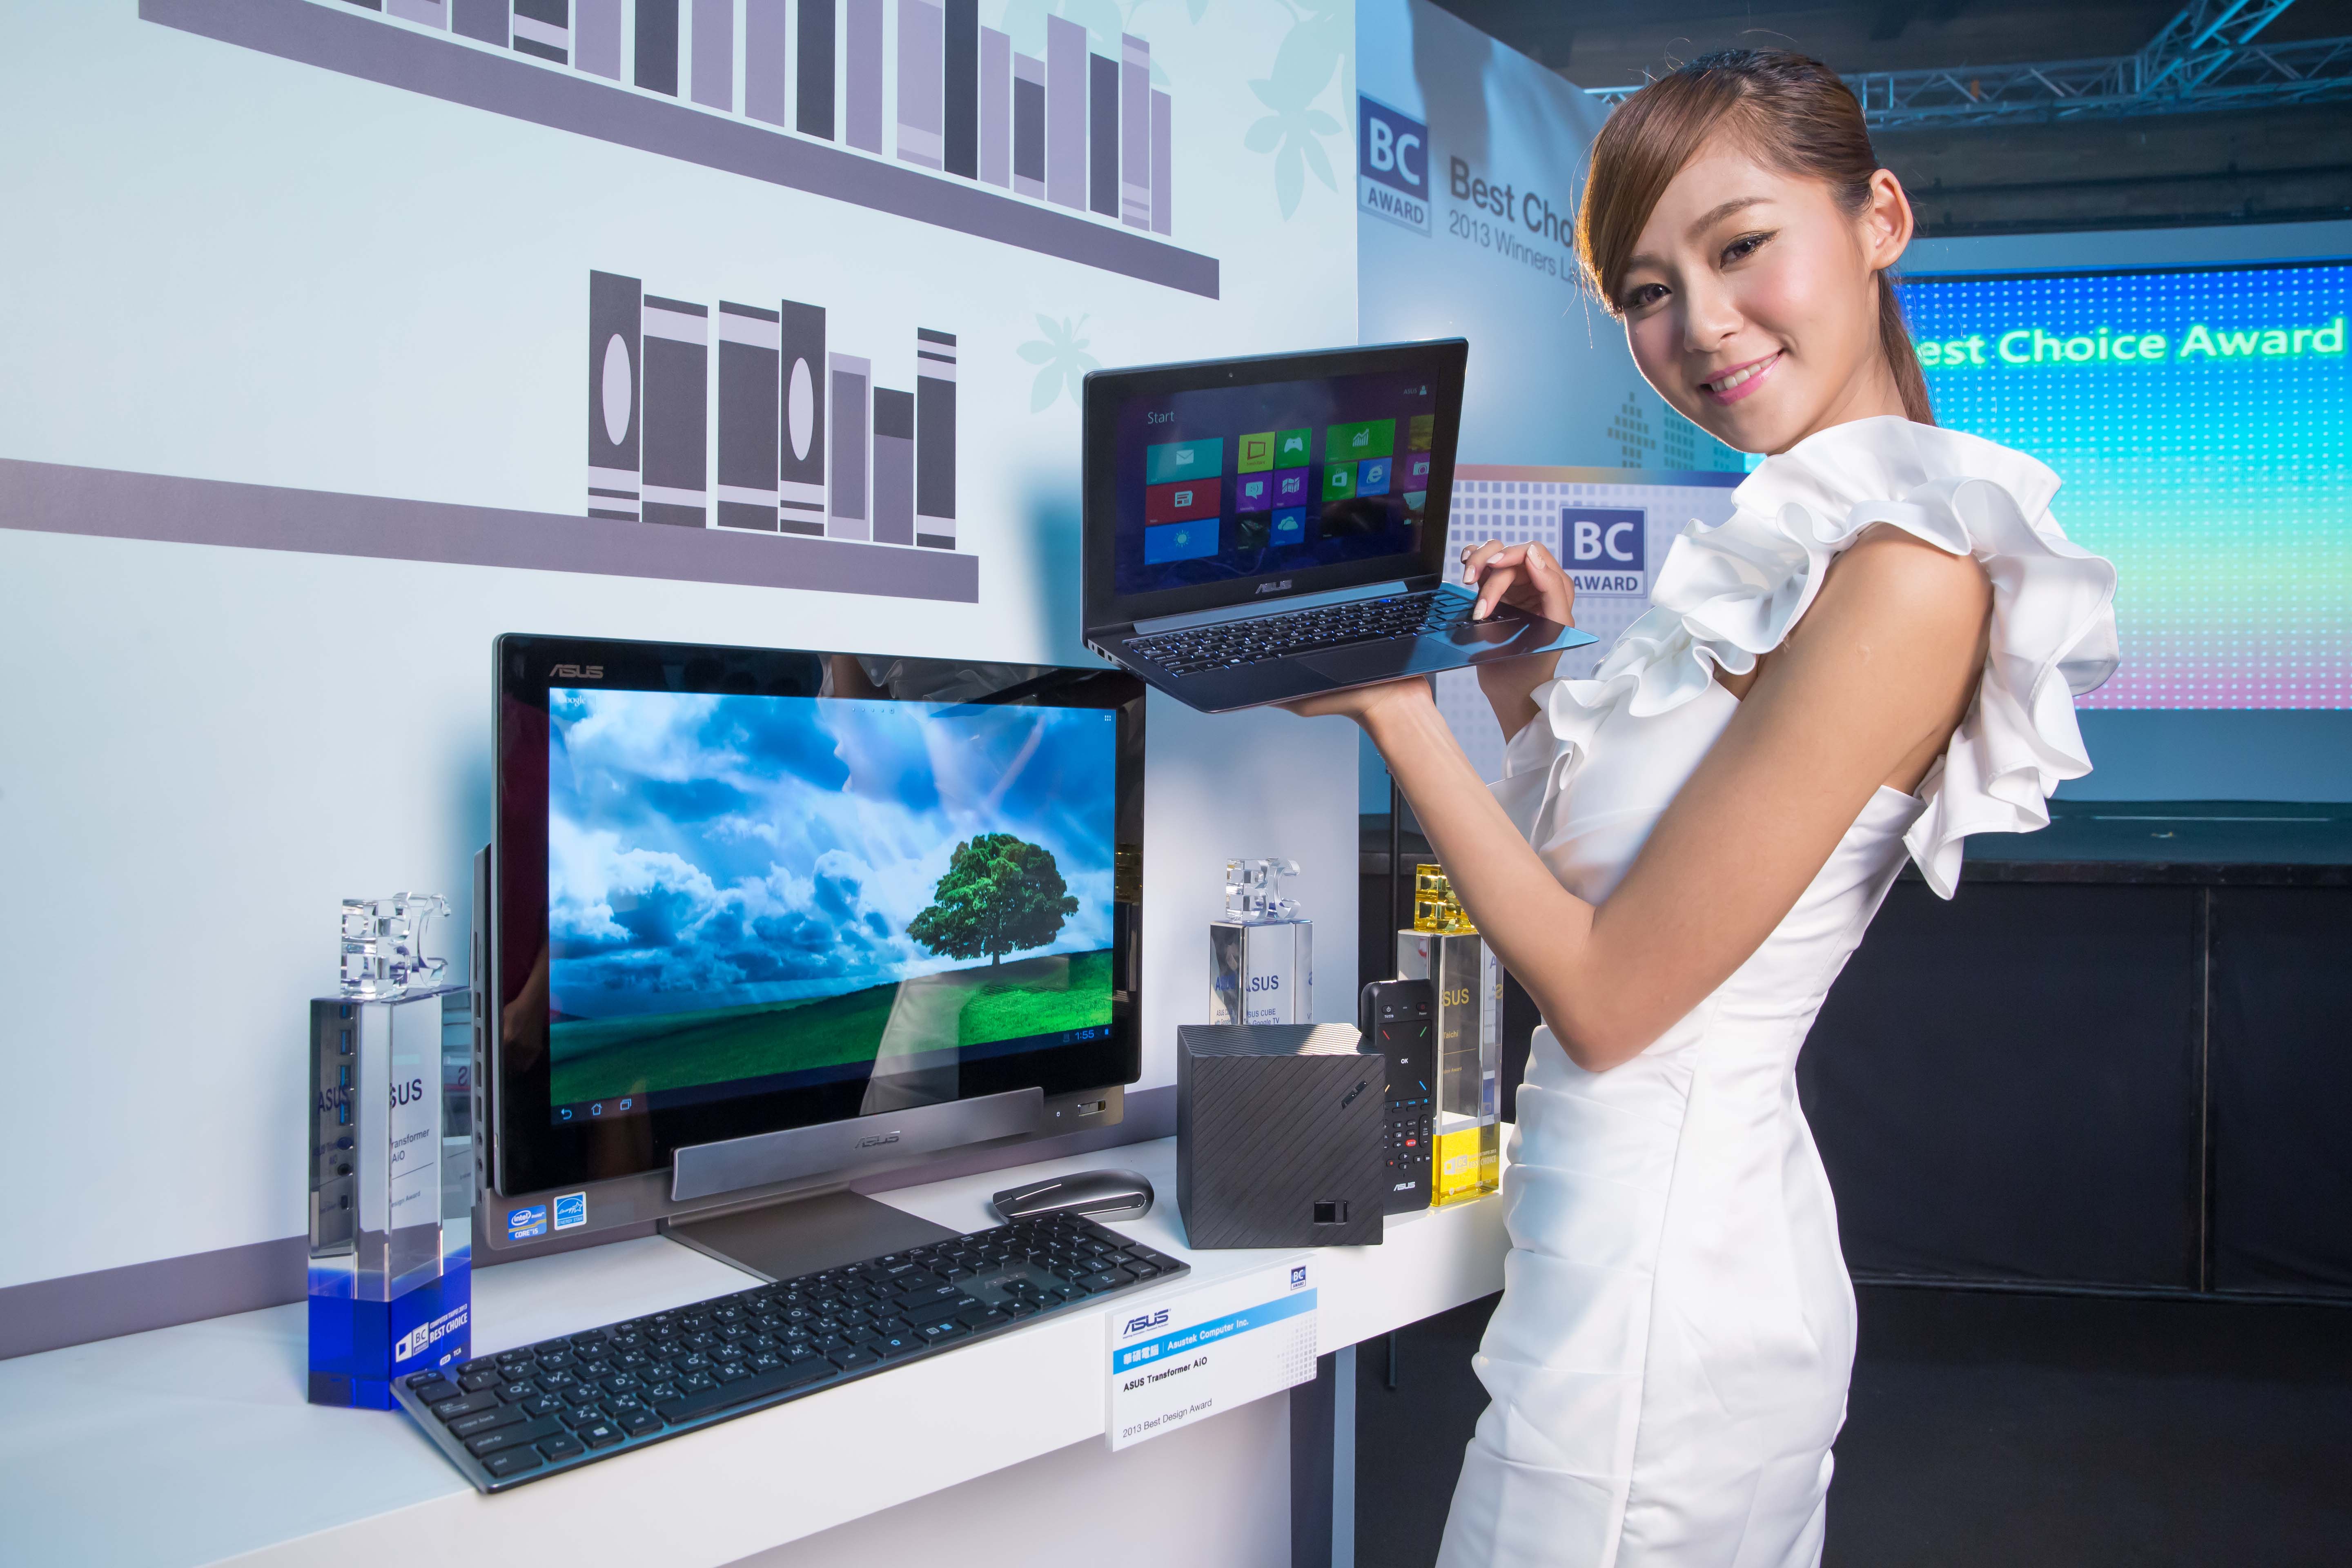 In Computex 2013, ASUS TAICHI_ won the Best Choice Gold and Best Choice of the Year Awards, while ASUS Transformer AiO and ASUS CUBE with Google TV also won Best Choice Awards